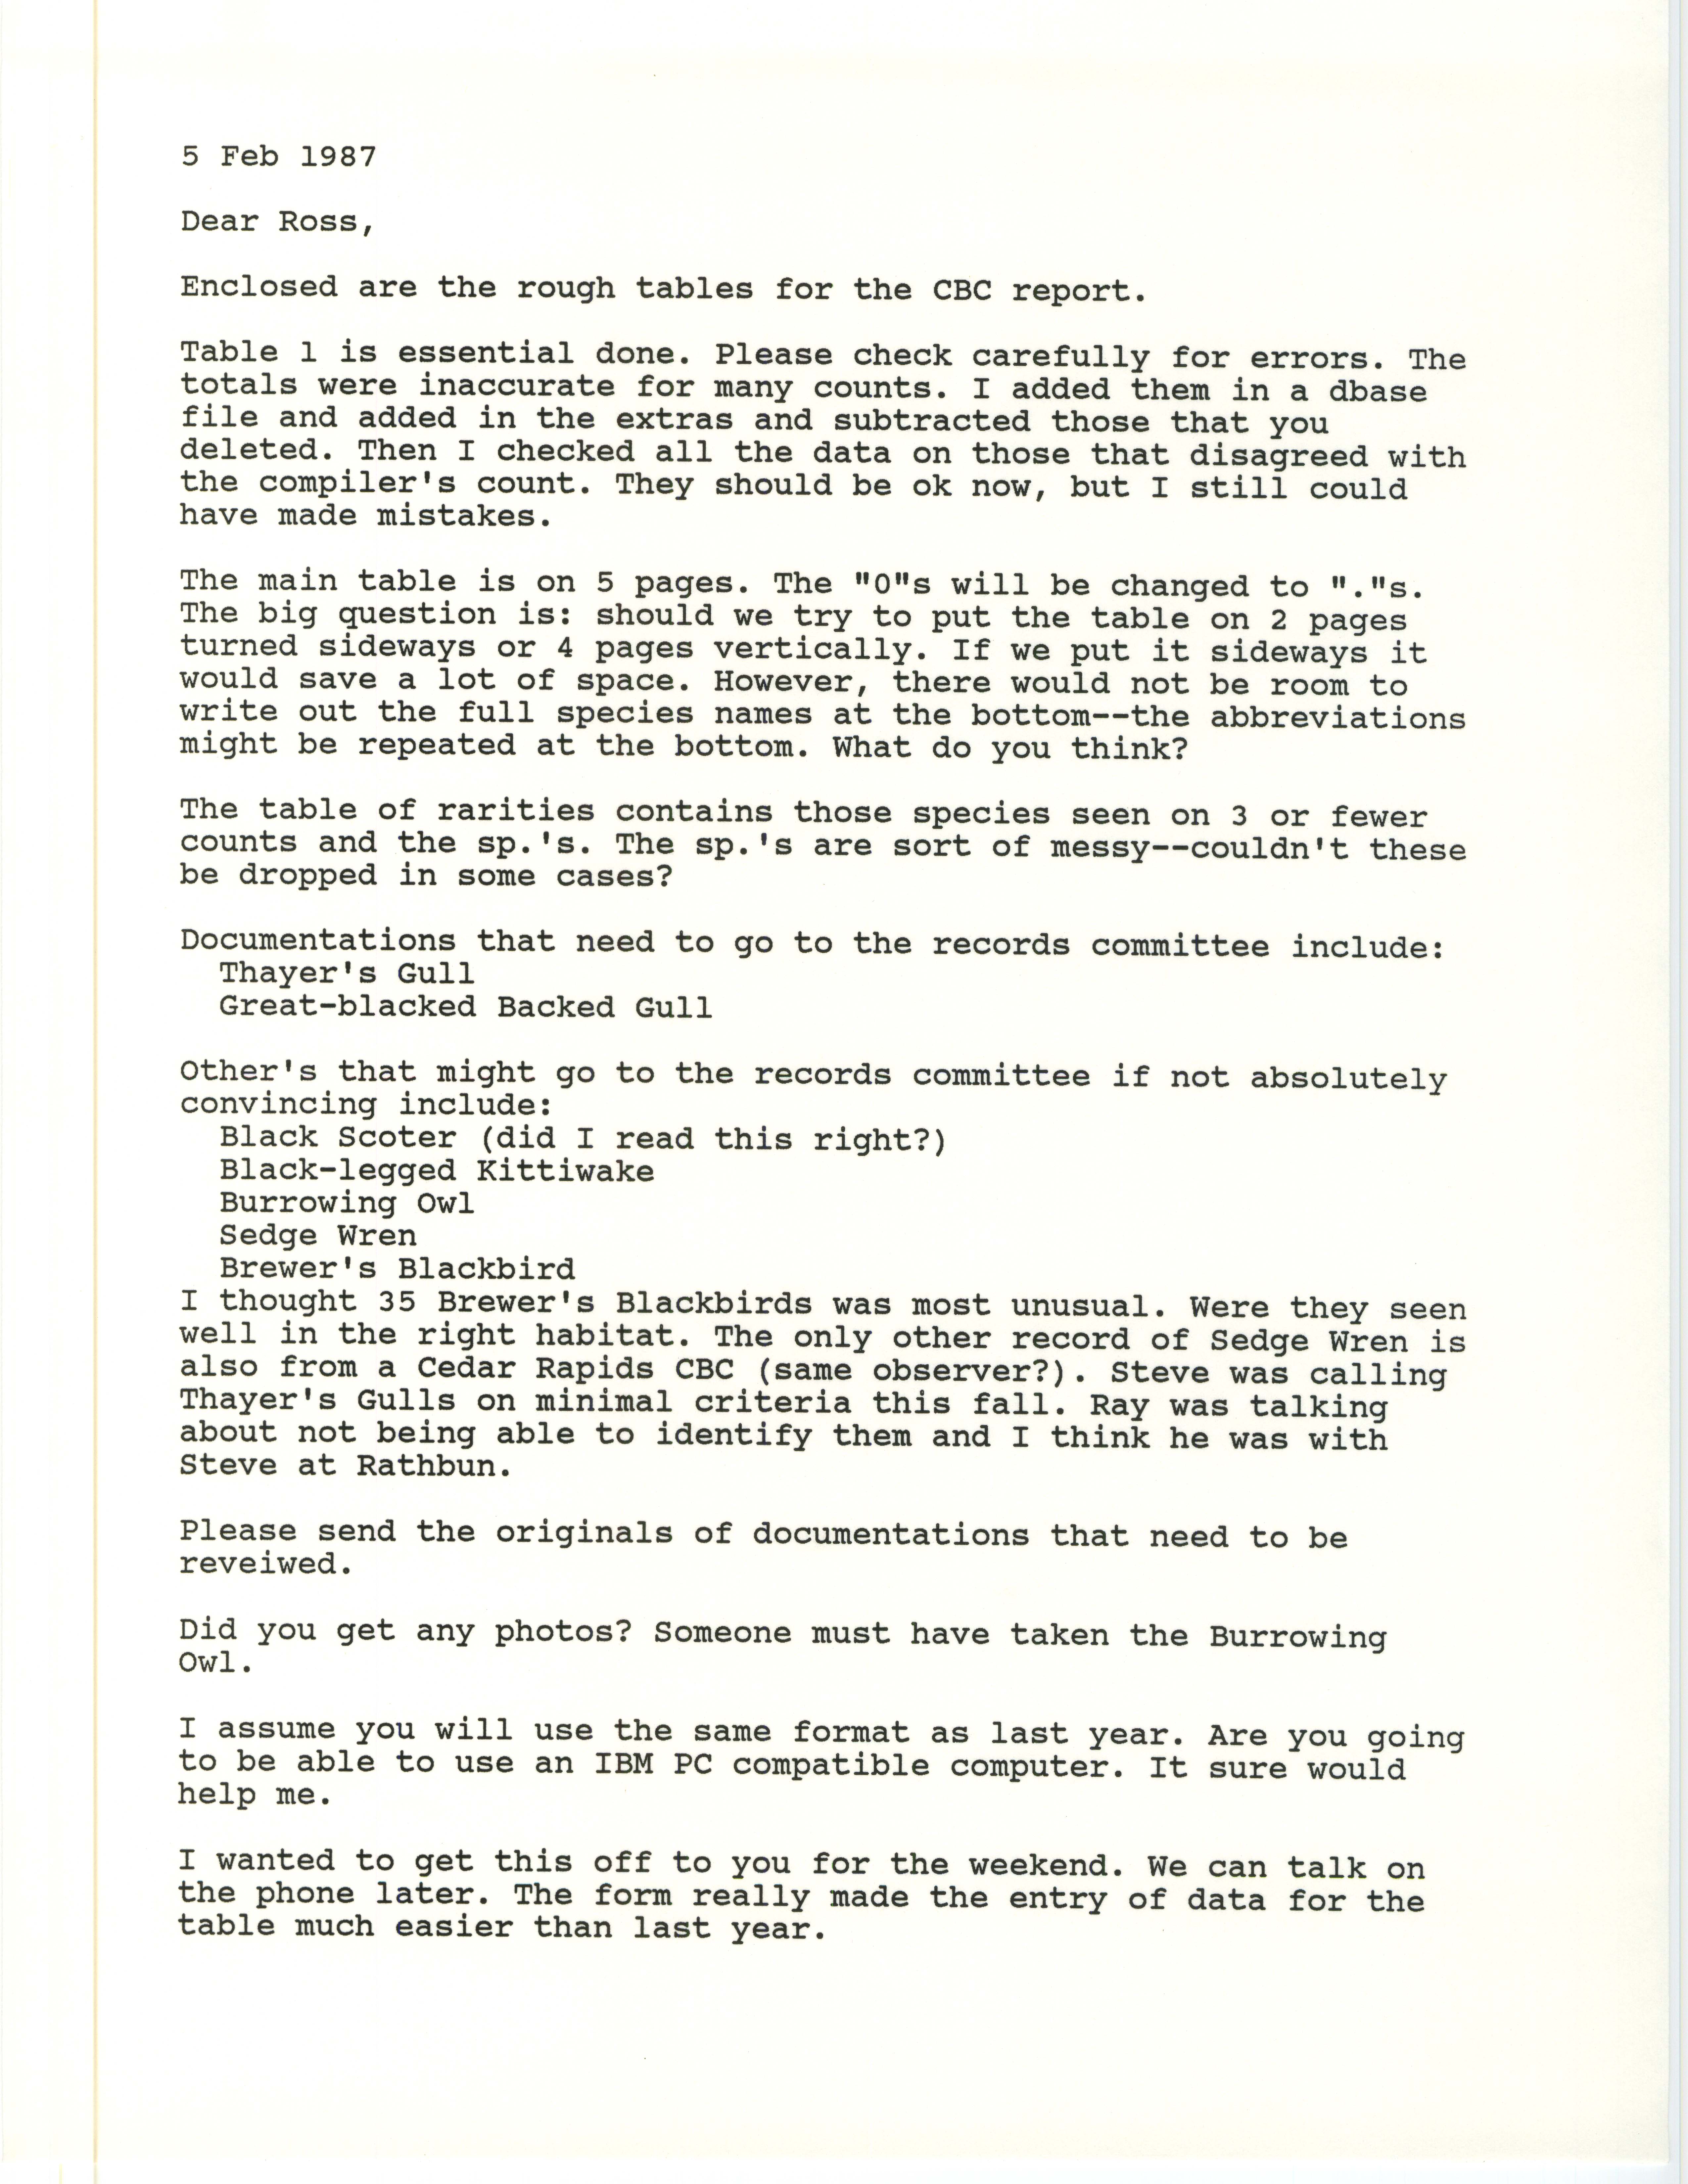 Letter to W. Ross Silcock regarding data tables for the Christmas bird count report, February 5, 1987